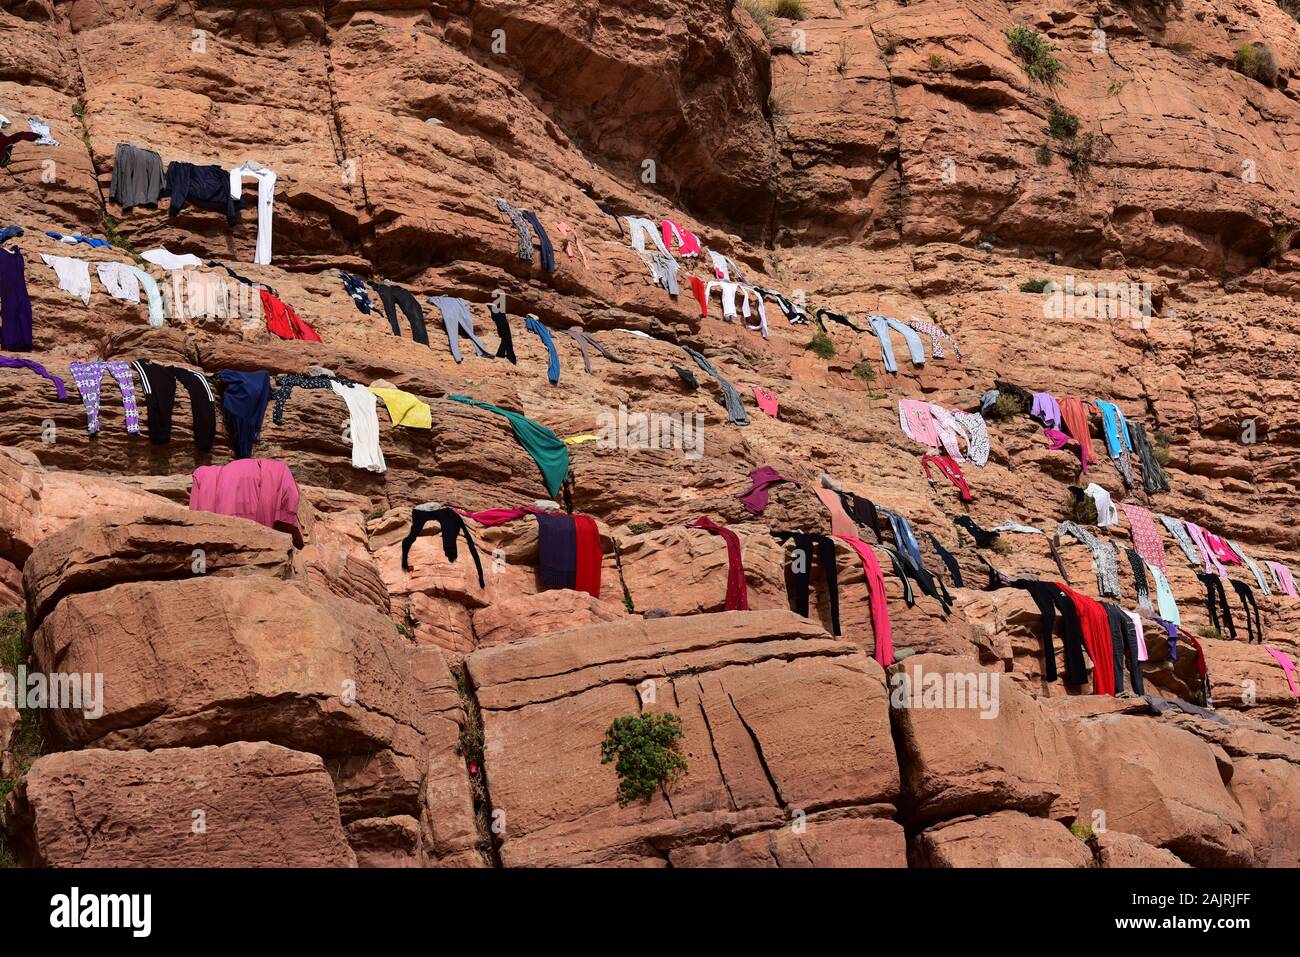 Village life - locals from the Moroccan village of Tighza lay out their laundry to dry on rocks under the midday sun, North Africa. Stock Photo